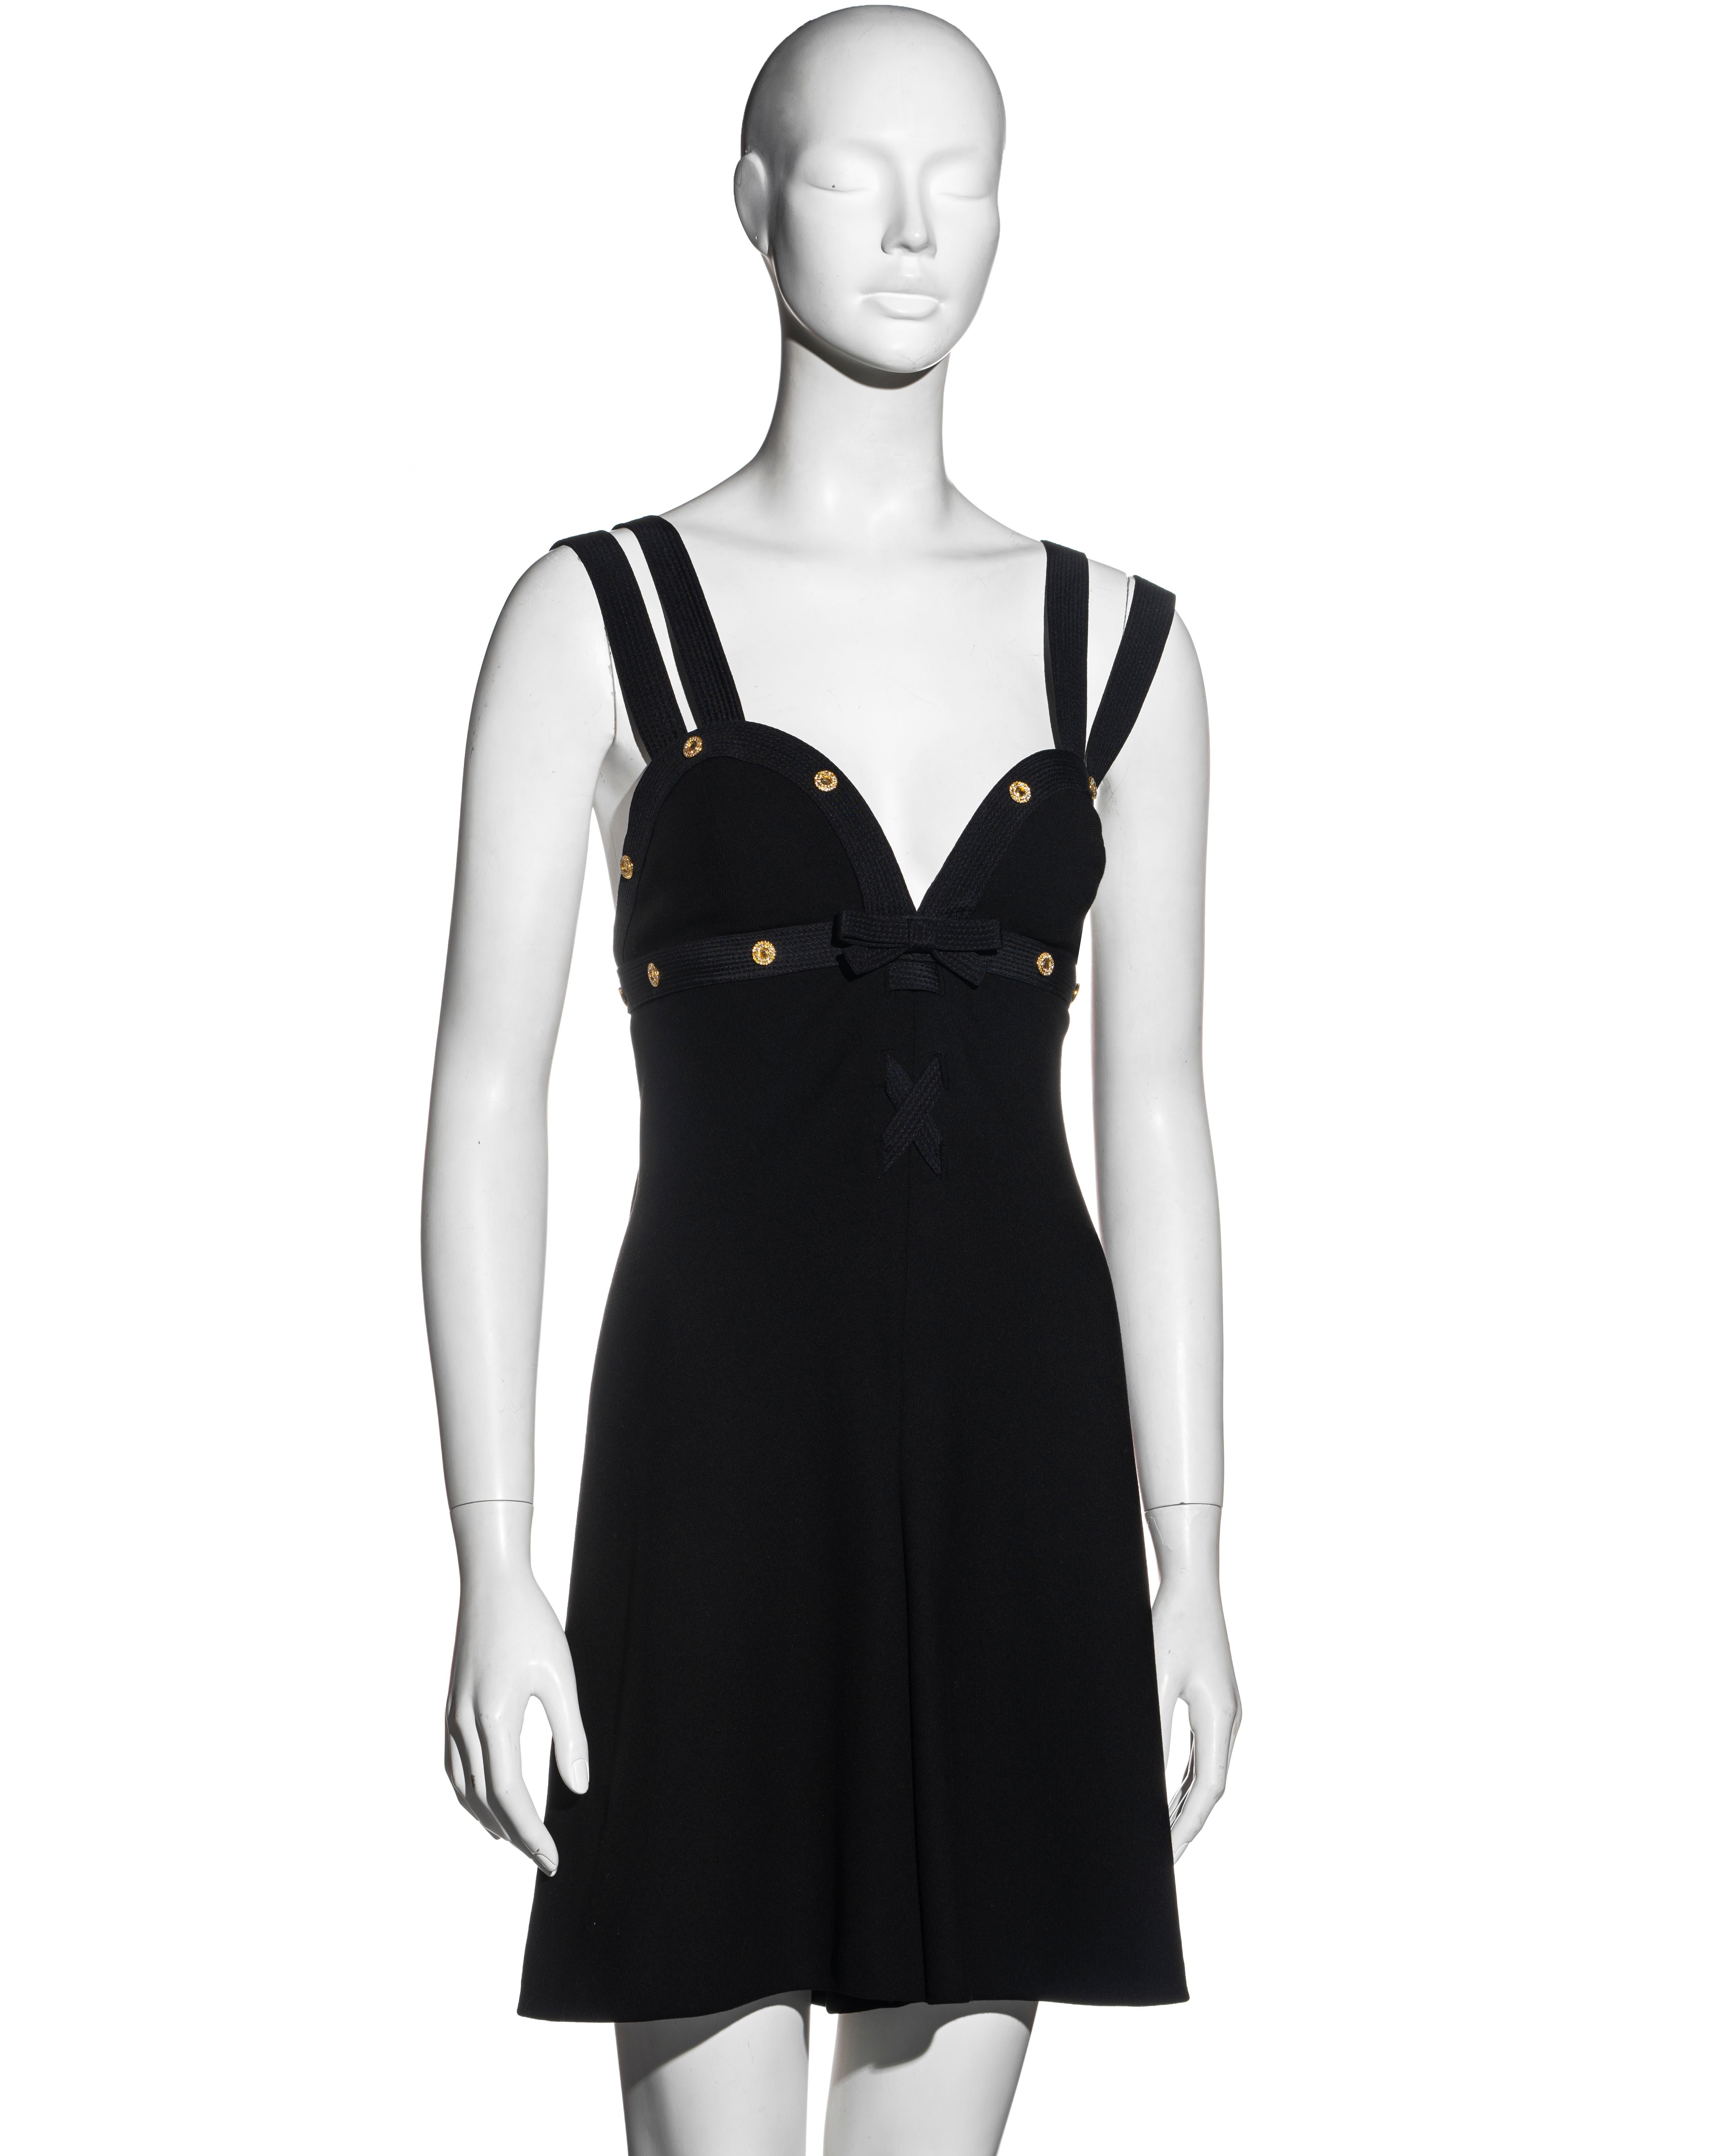 Women's Gianni Versace black wool double strap playsuit with gold crystal studs, ss 1992 For Sale